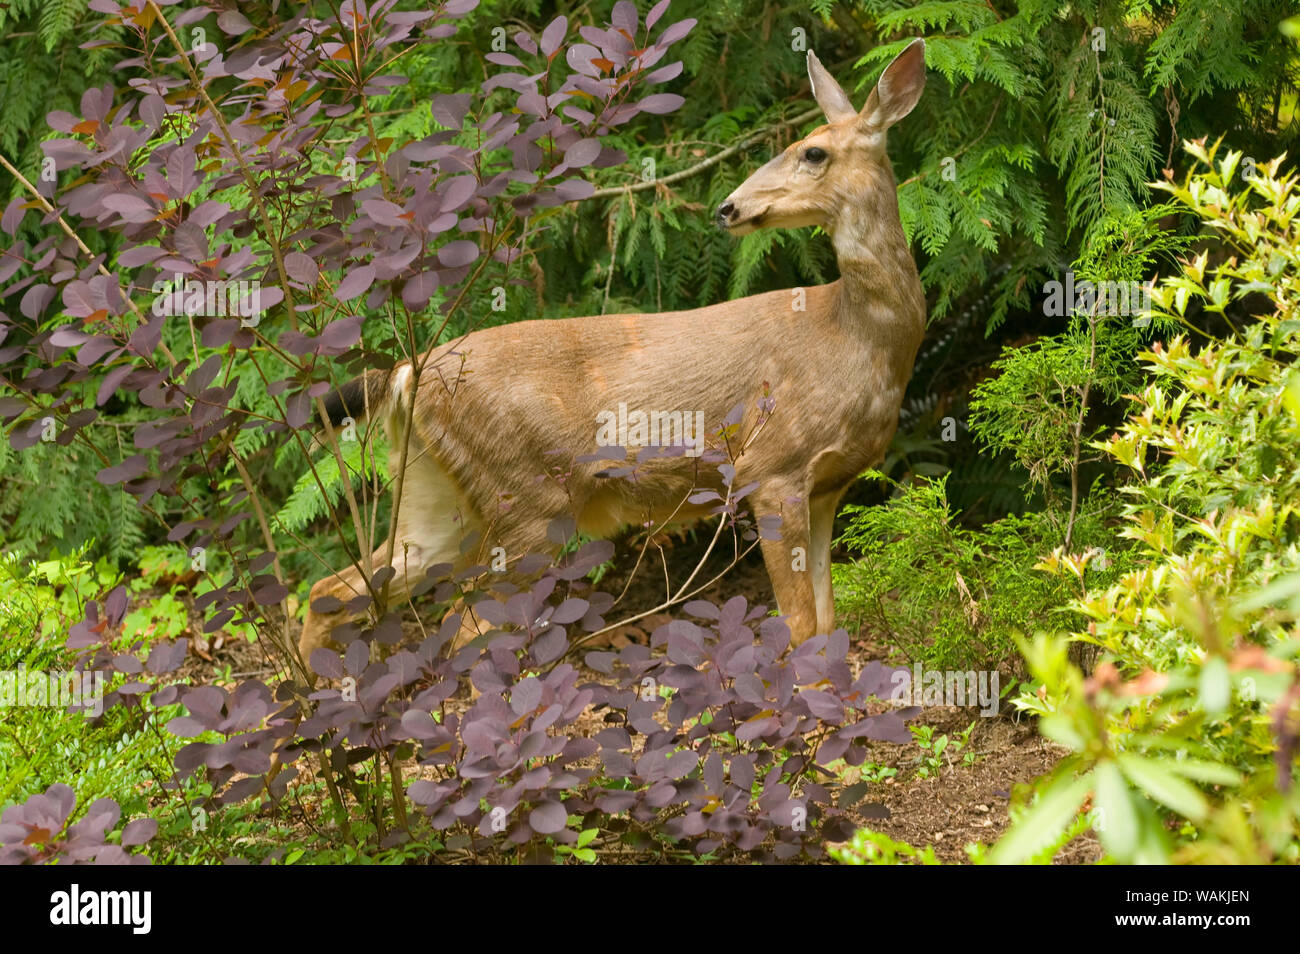 Issaquah, Washington State, USA. Mule deer doe standing among cultivated plants in a rural yard. Stock Photo